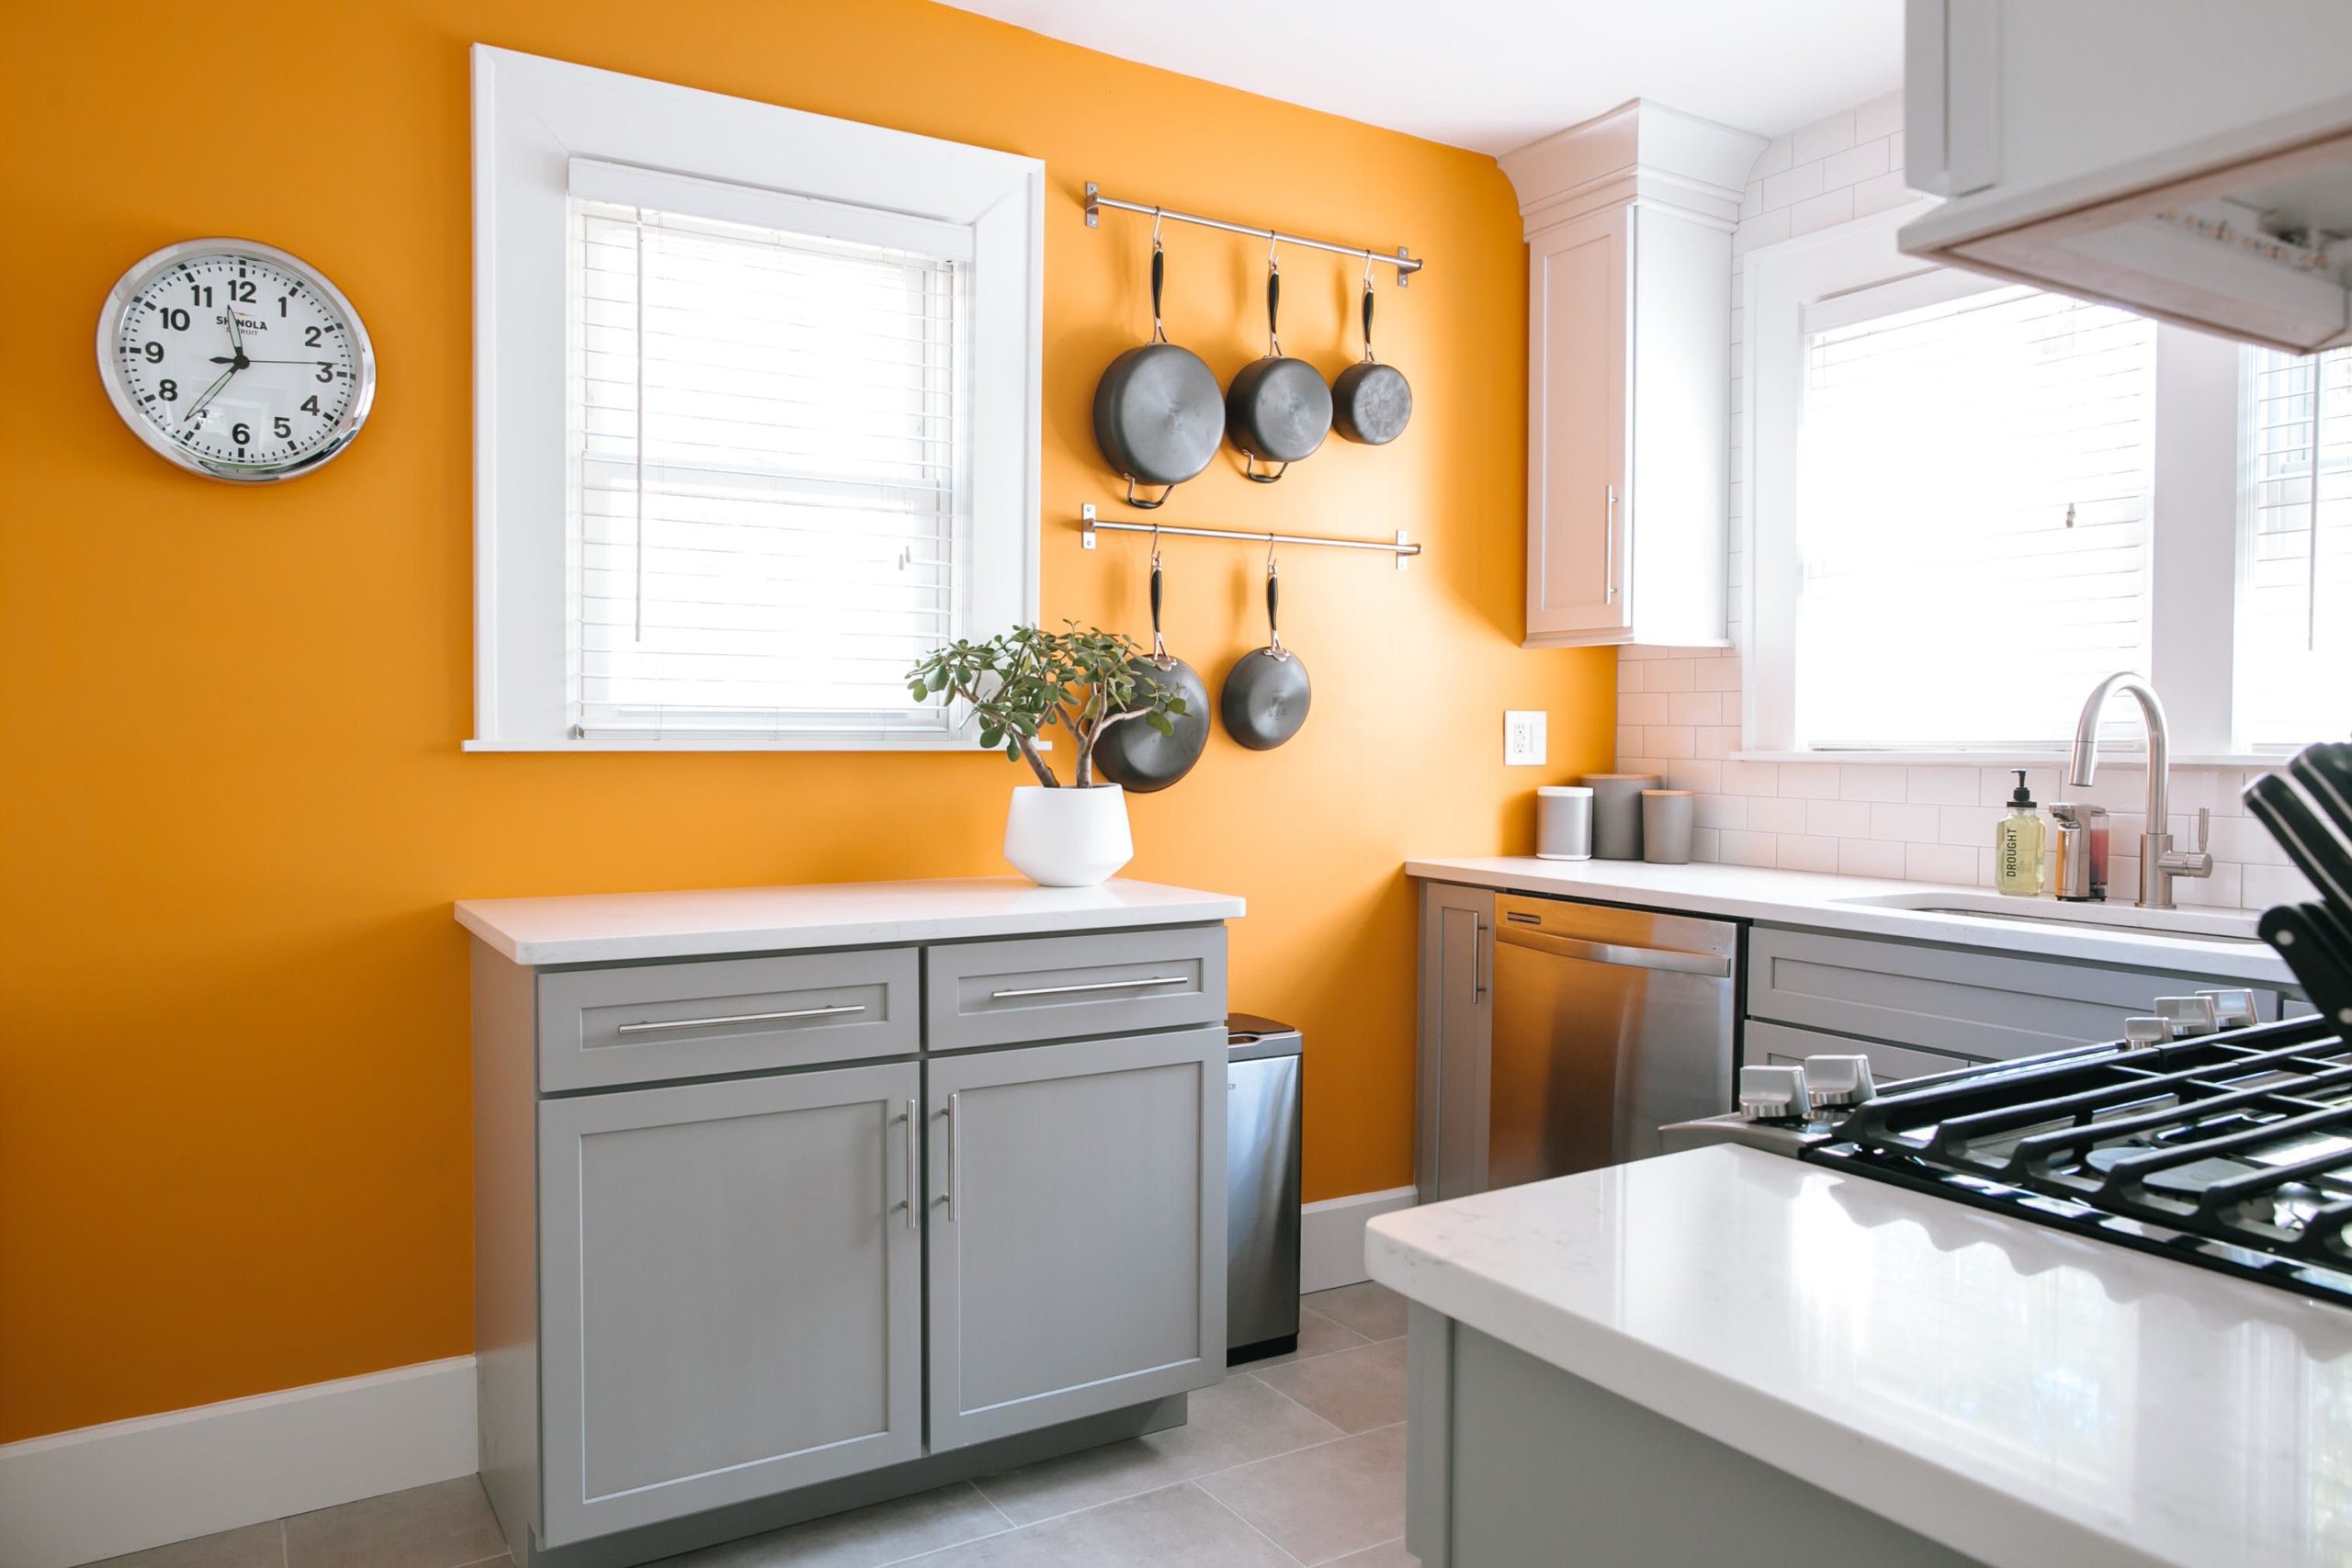 Create Orange on One Side of the Wall